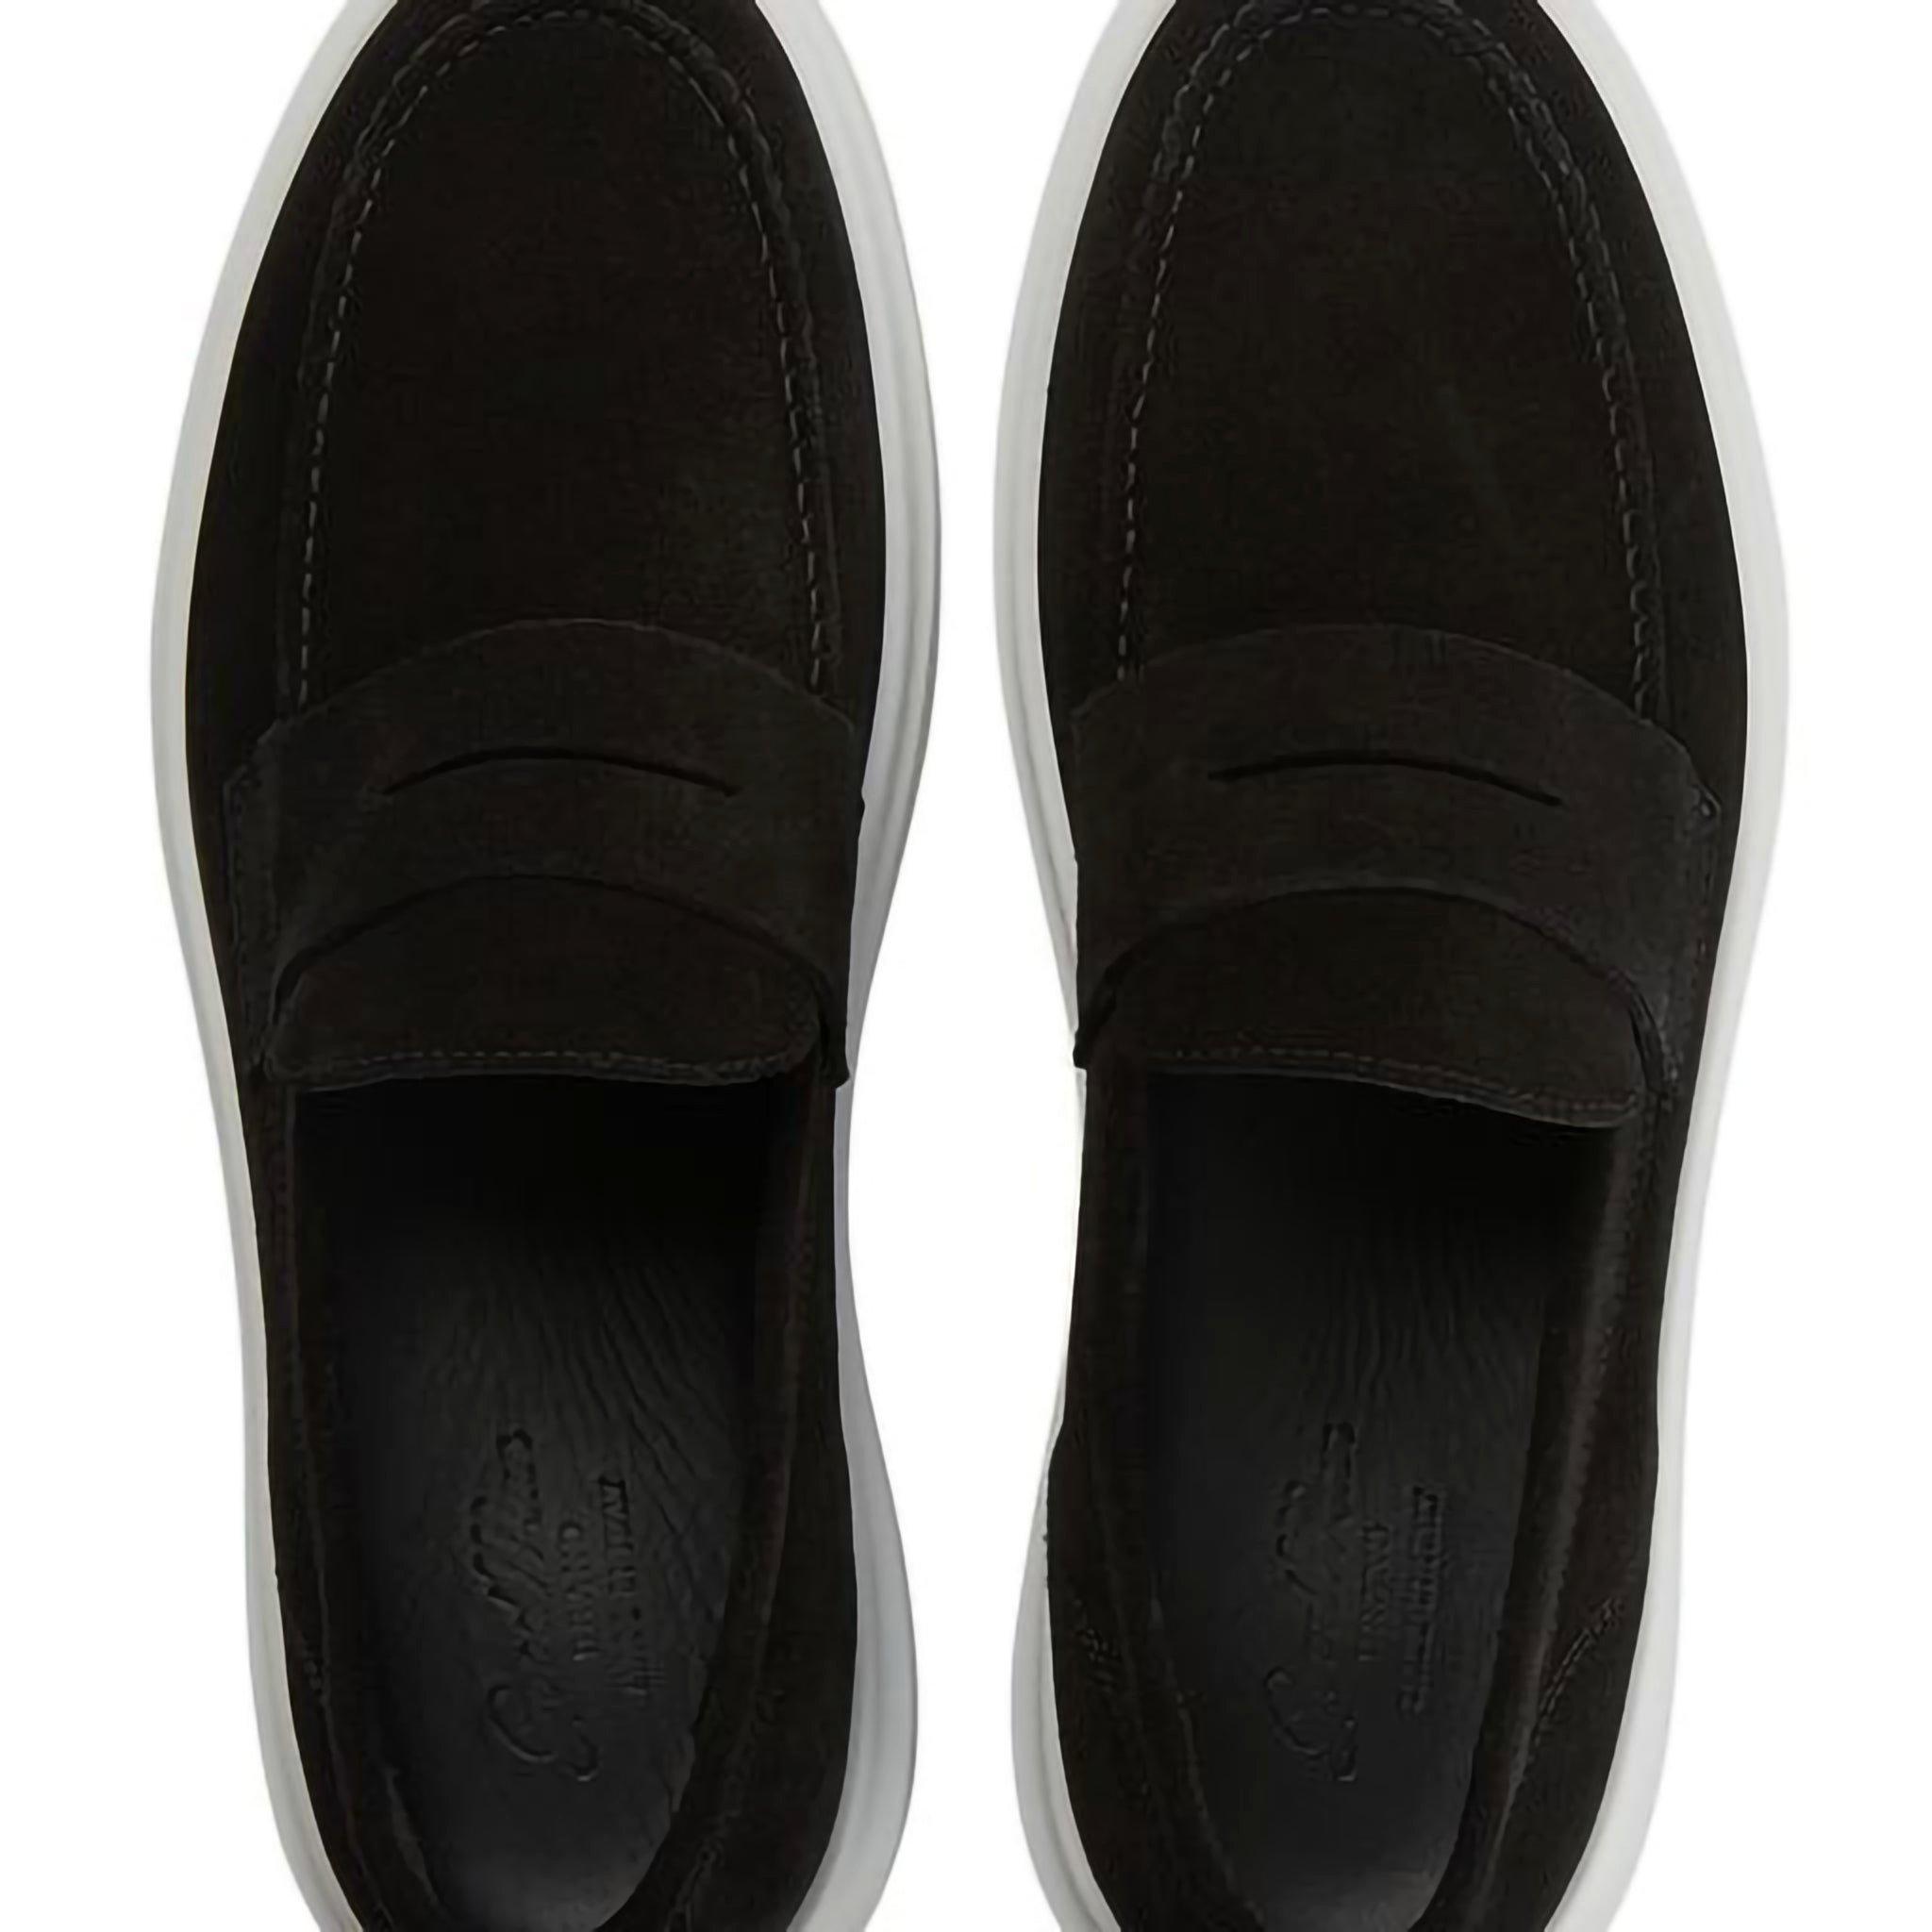 Legend London Suede Loafers image 3